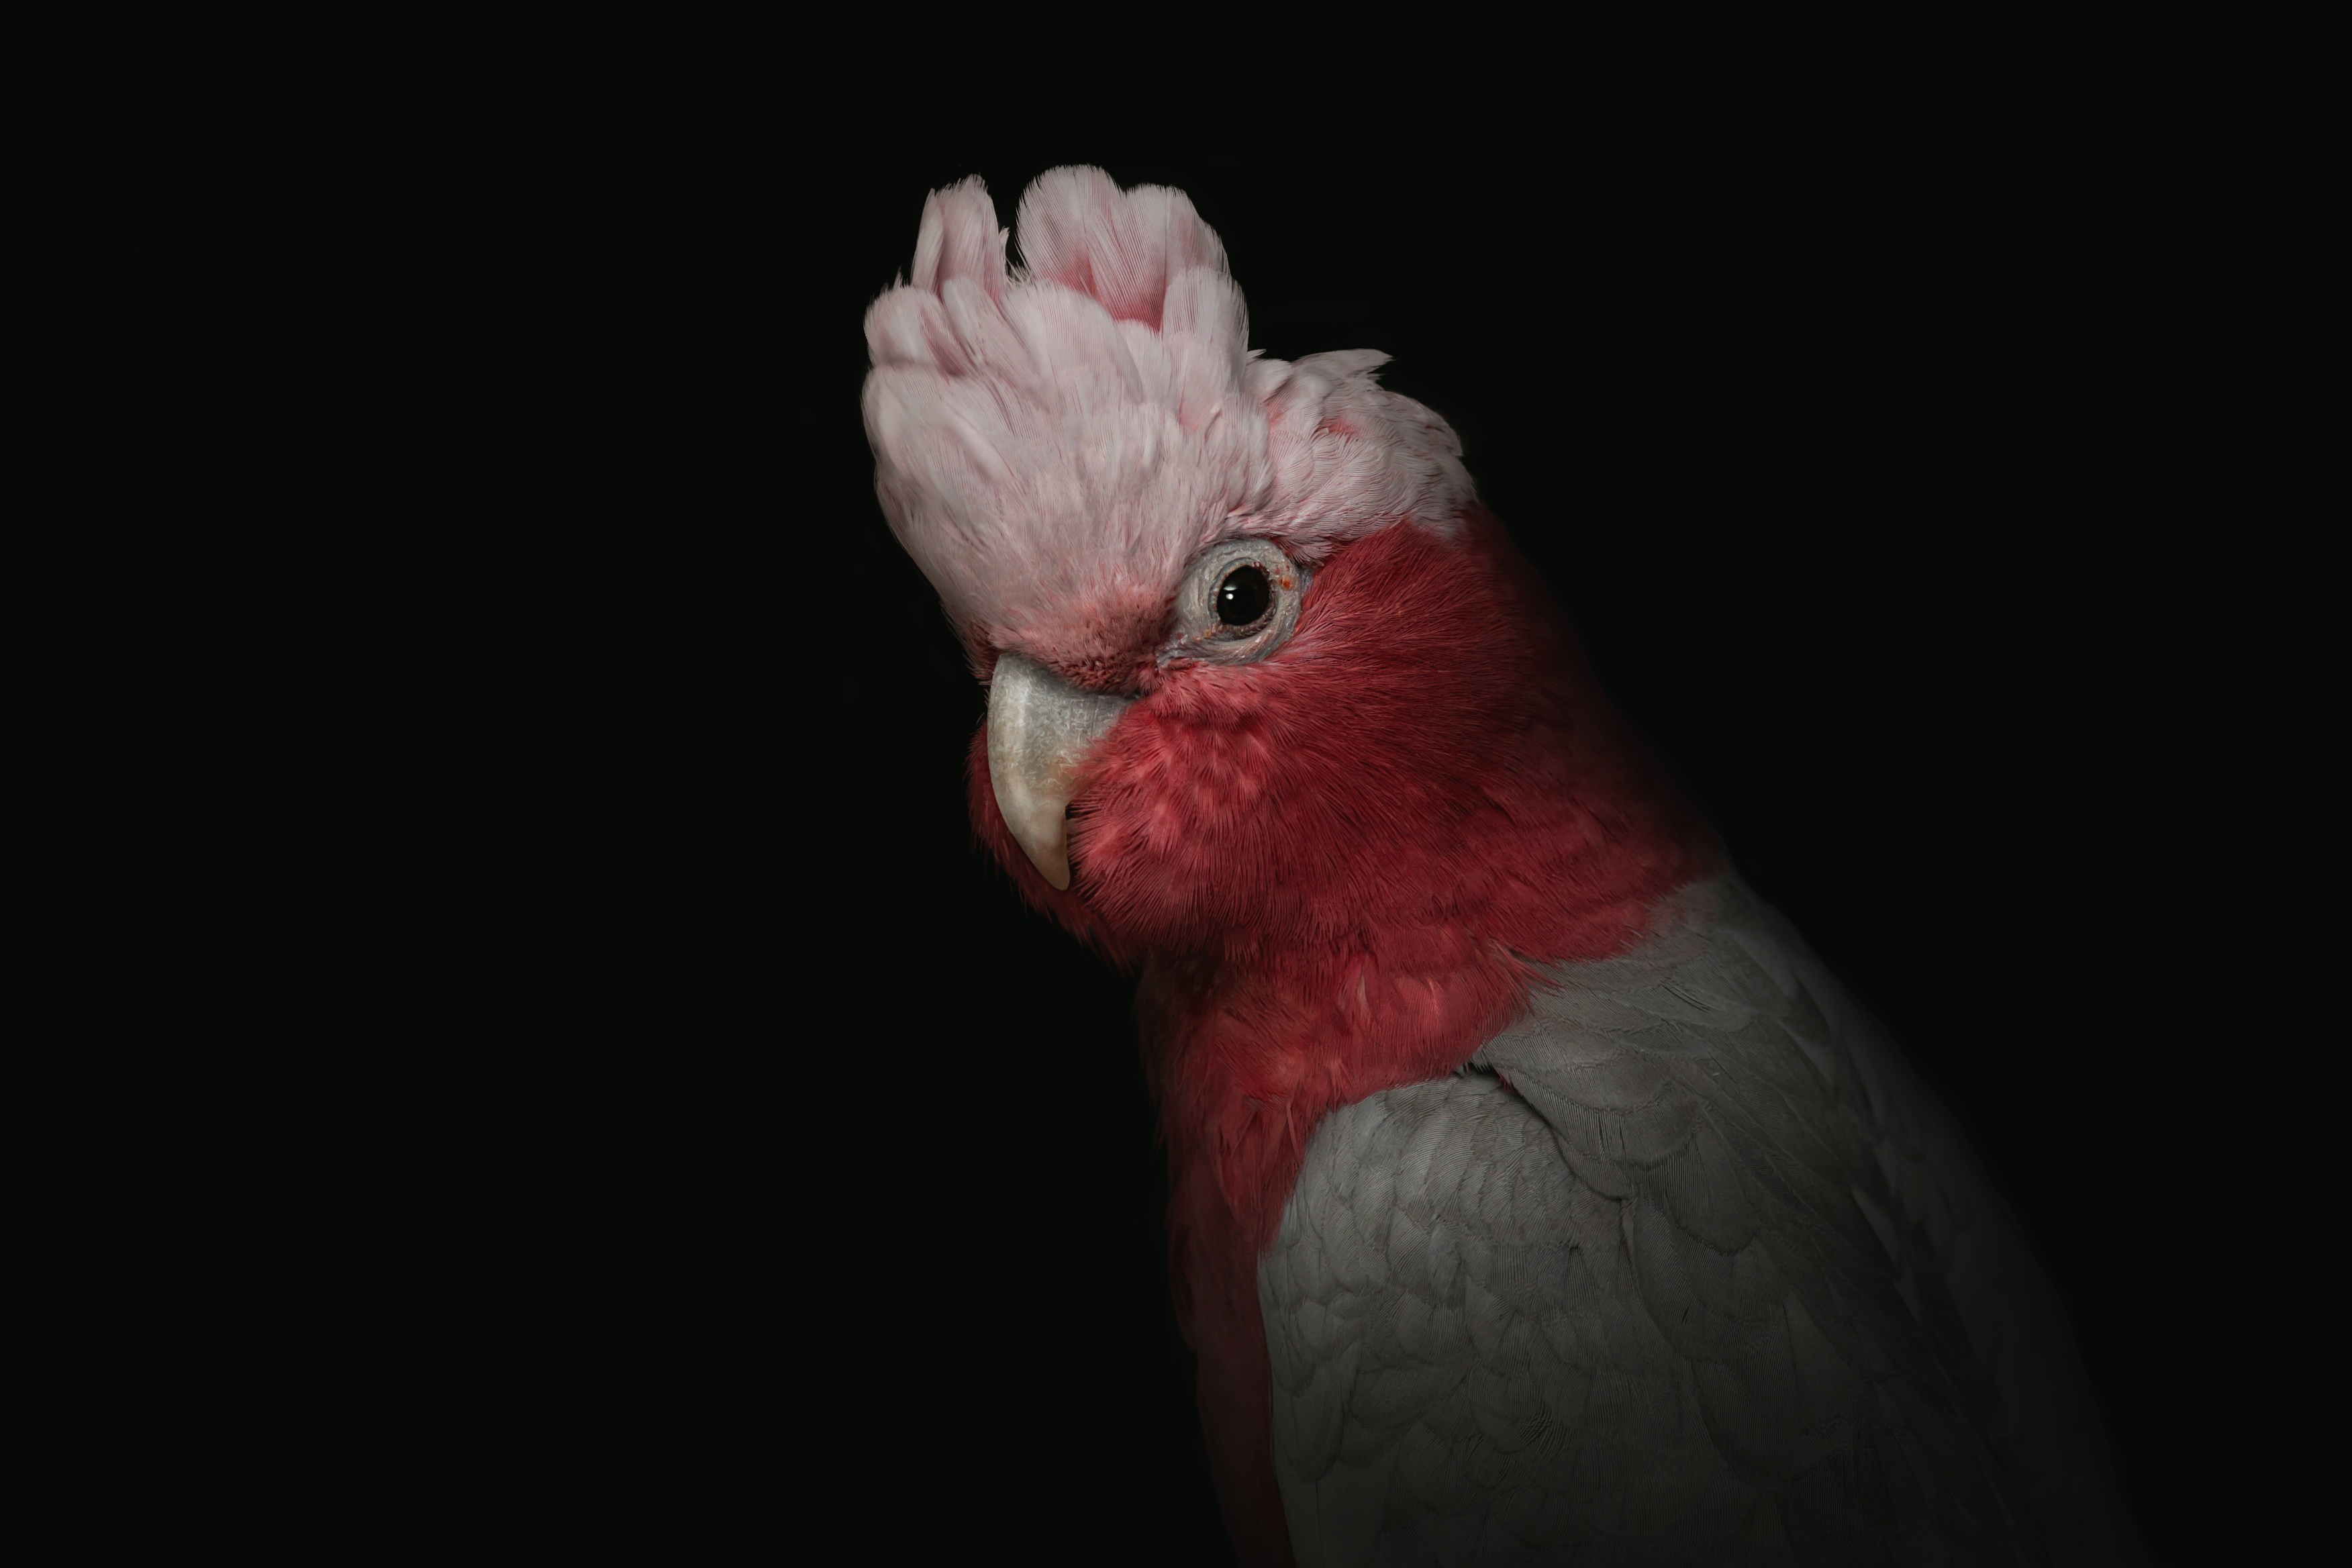 58105 download wallpaper funny, animals, parrots, pink, bird, portrait, cockatoo screensavers and pictures for free